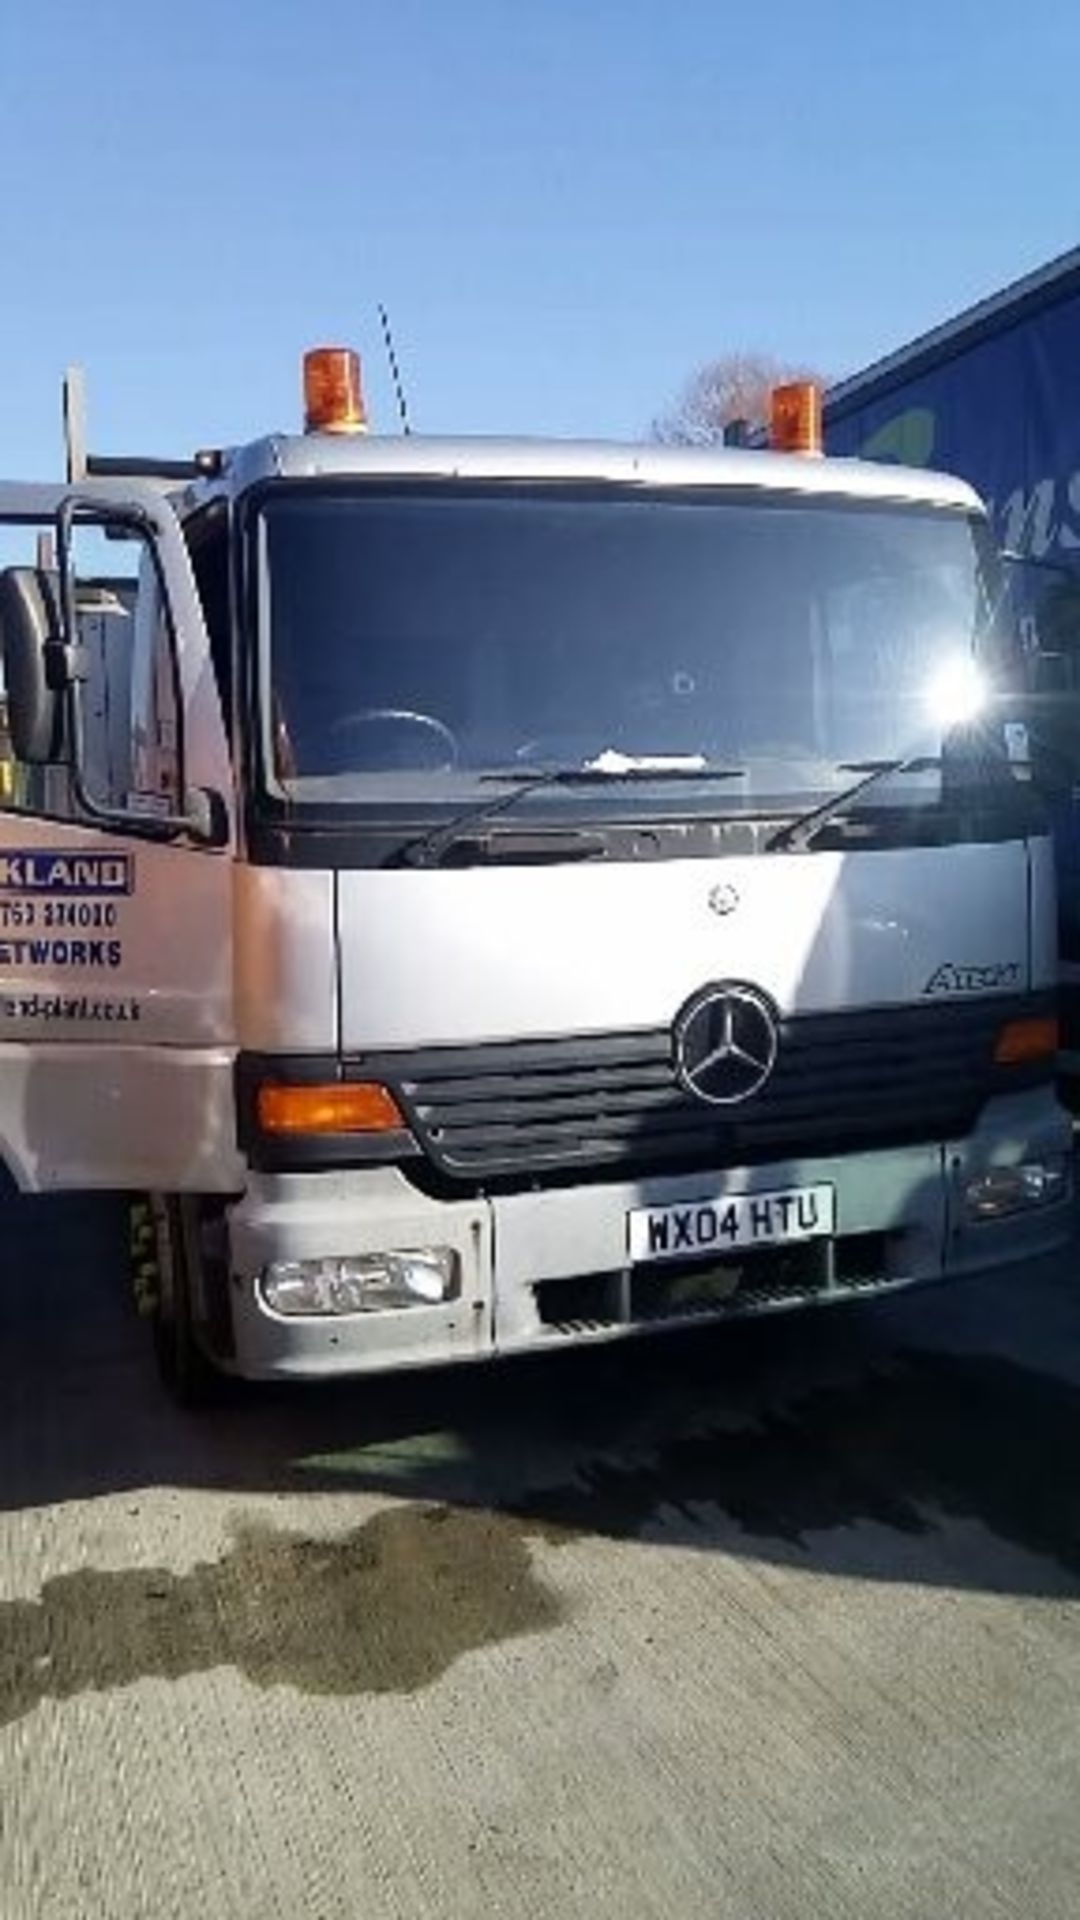 2004 Mercedes Drop Side Lorry With Palfinger Crane. - Image 13 of 14